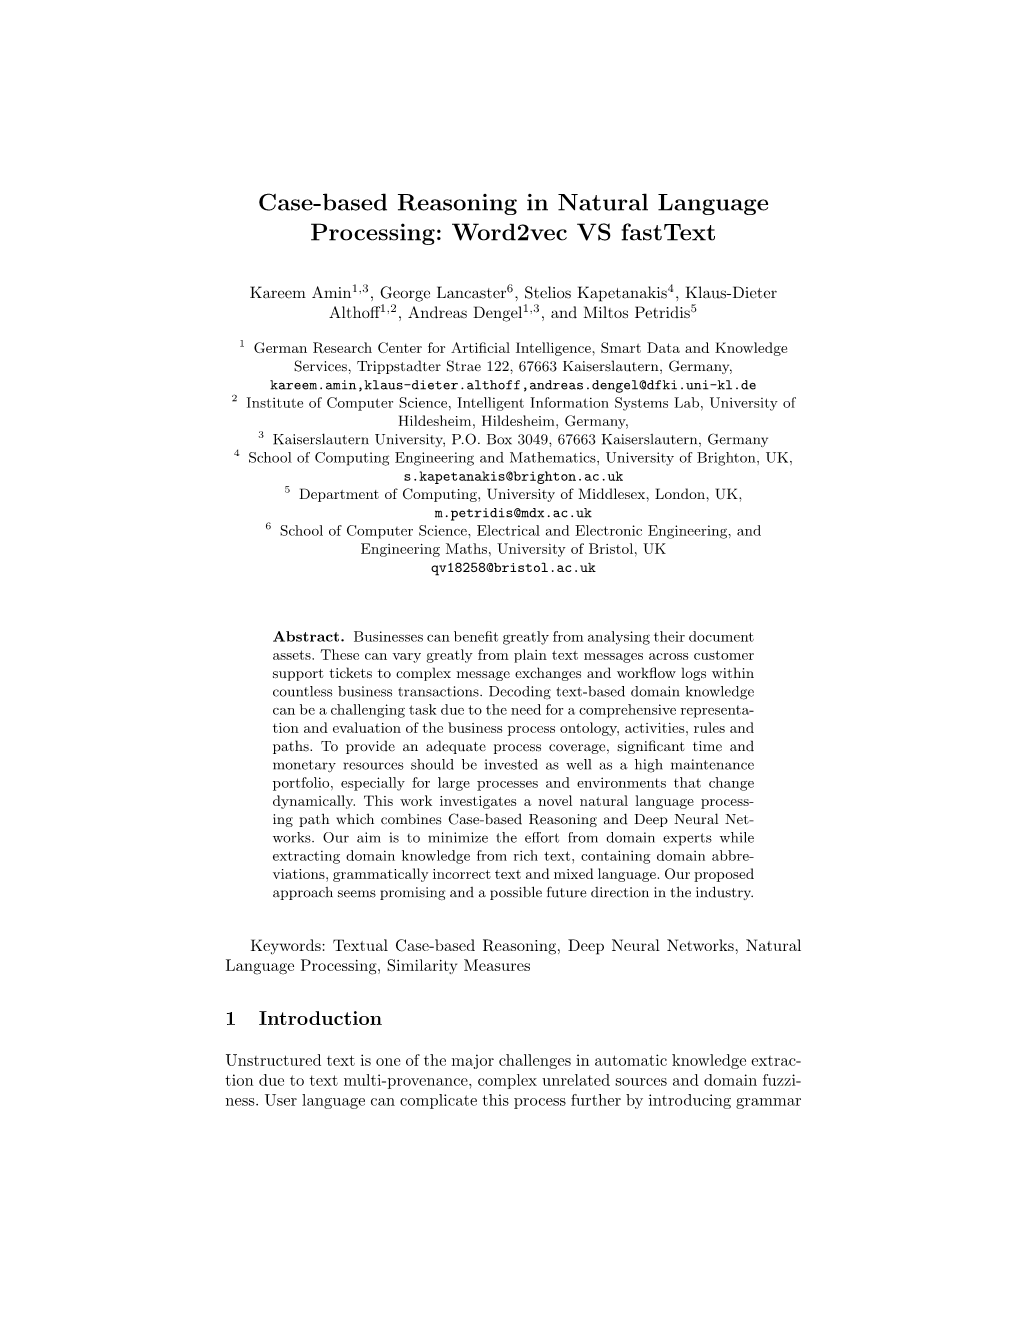 Case-Based Reasoning in Natural Language Processing: Word2vec VS Fasttext